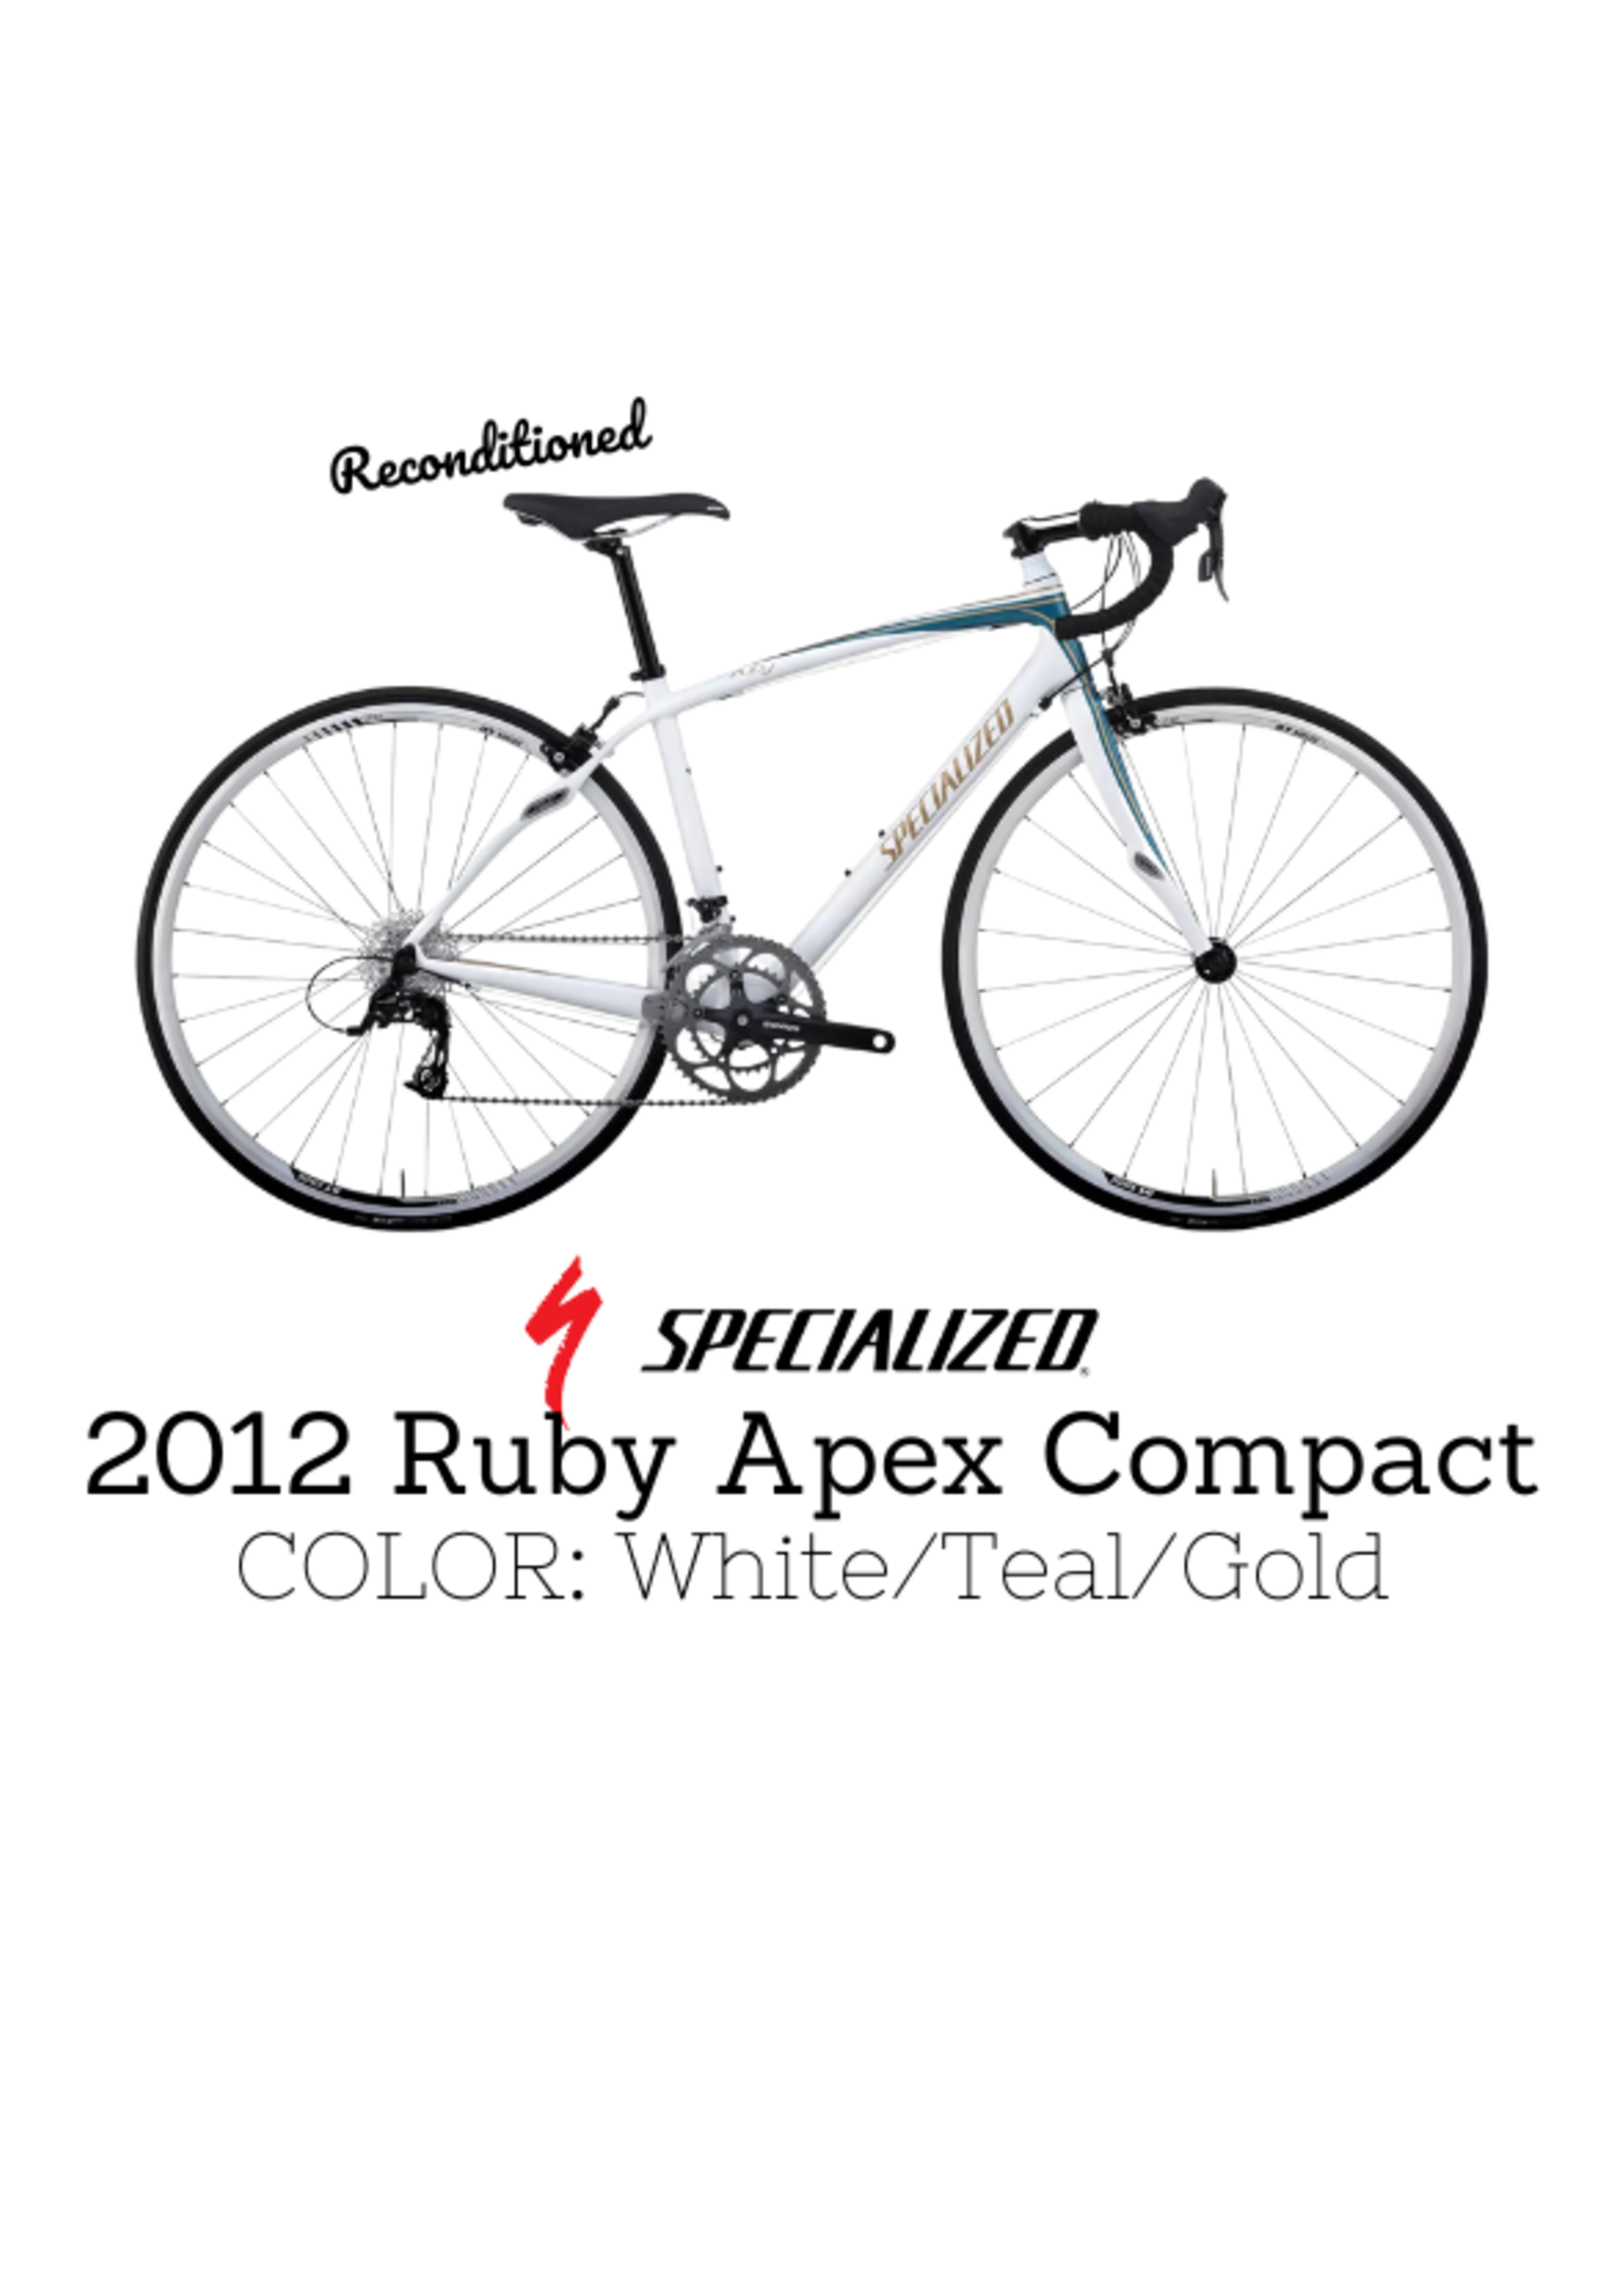 Specialized Reconditioned 2012 Specialized Ruby Apex Compact 48